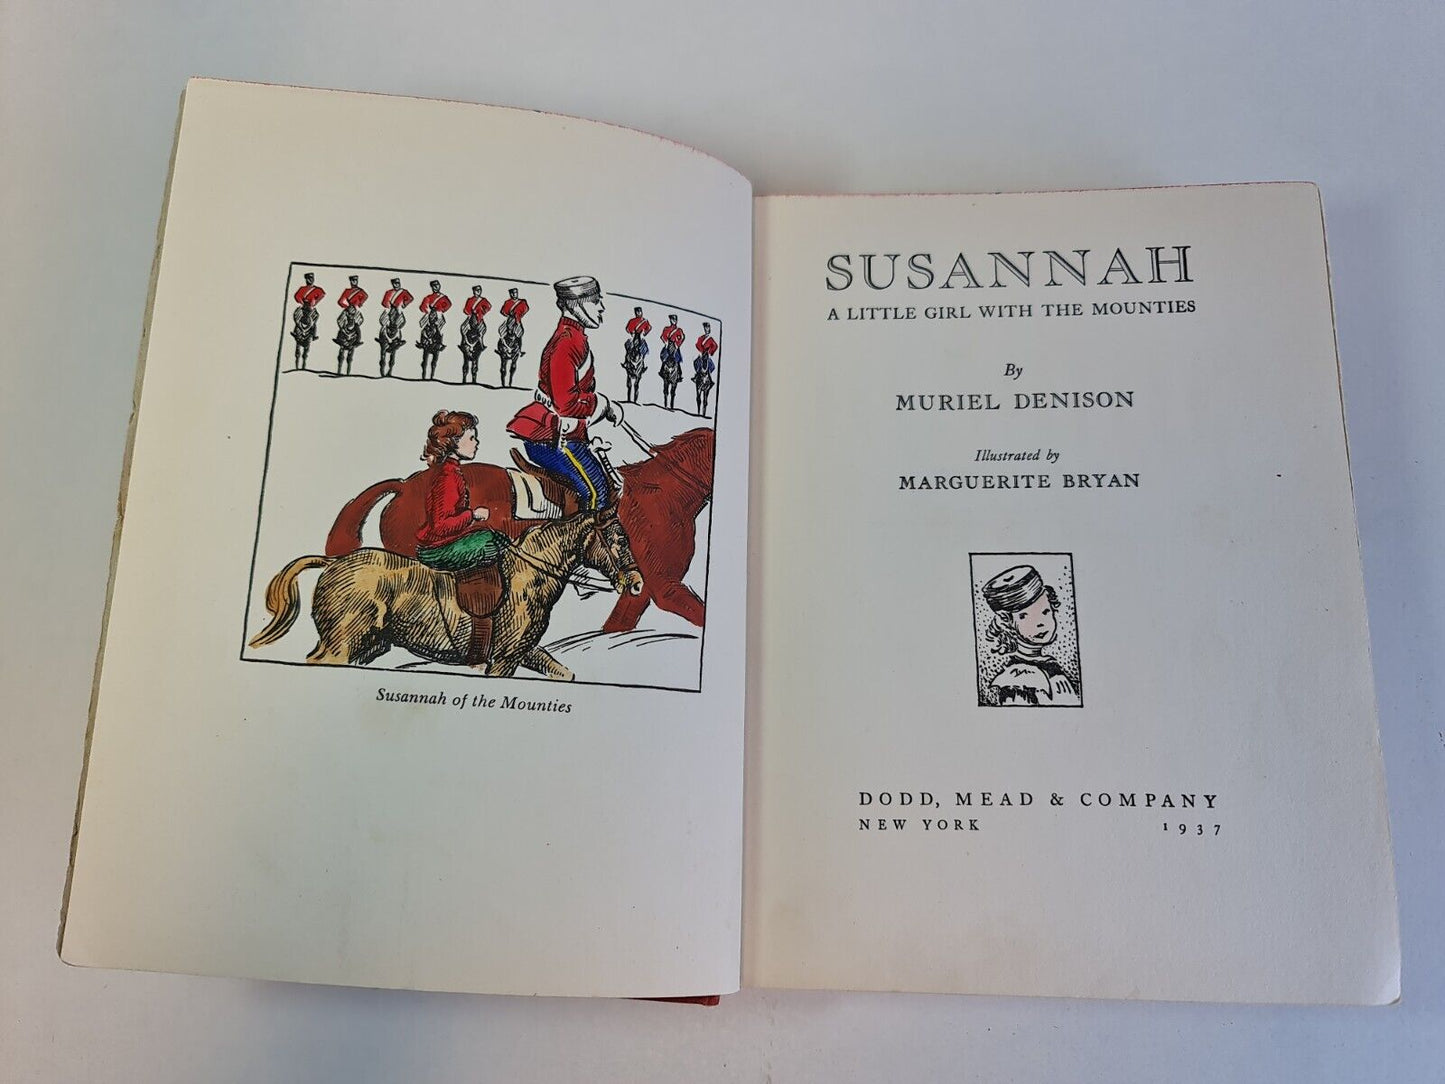 Susannah: A Little Girl With the Mounties by Muriel Denison (1937)